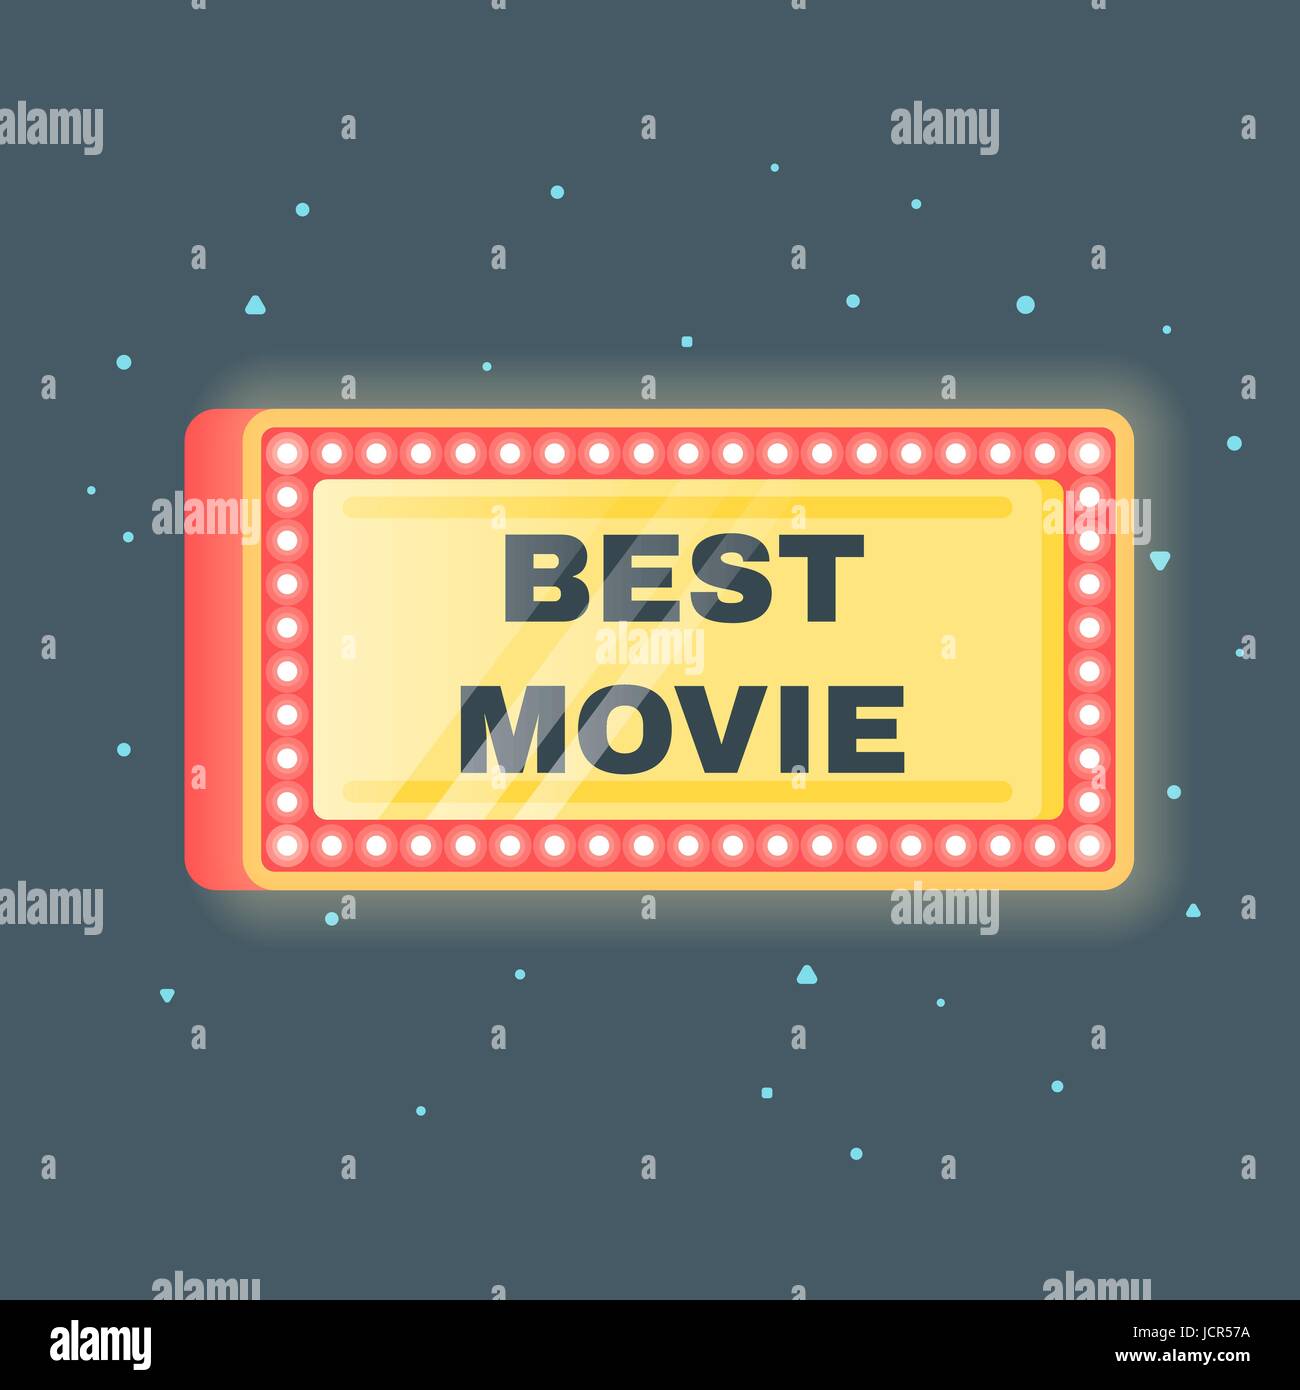 Vector flat style illustration of "Best movie" shining retro light banner. Isolated on black background. Icon for web. Stock Vector